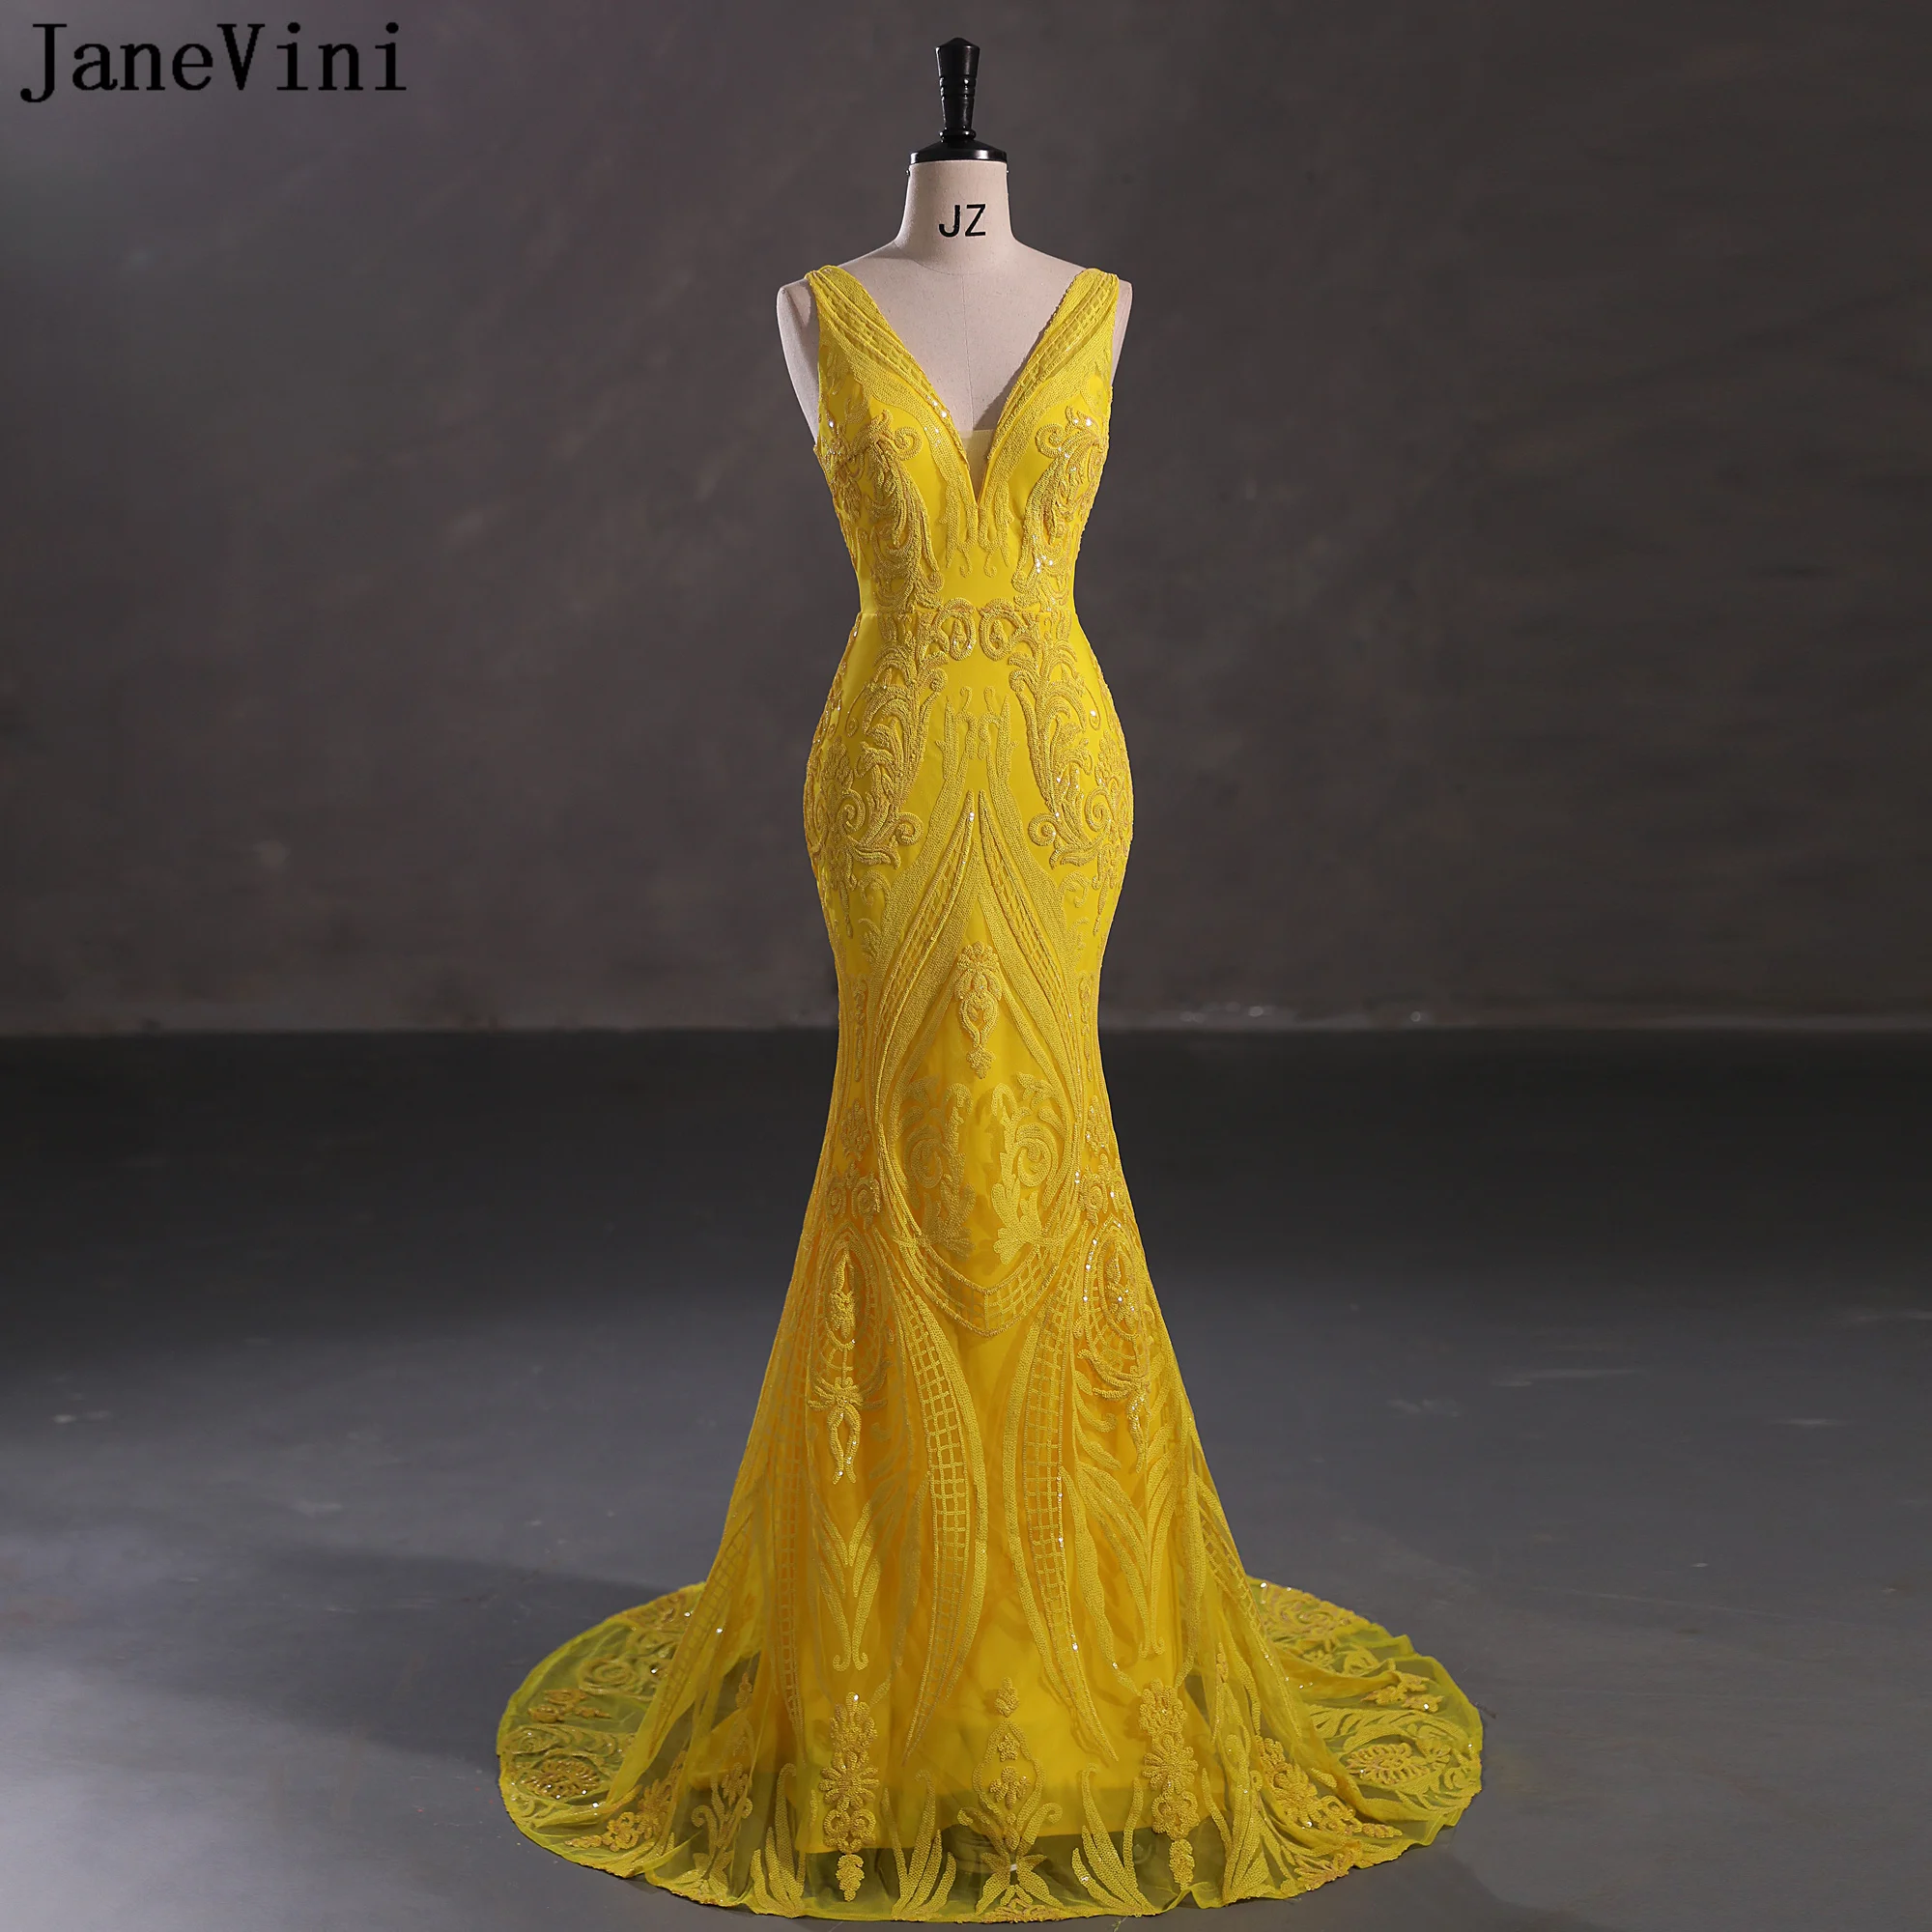 JaneVini Sparkly Sequined Mermaid Evening Dresses Yellow Luxury Night Dress Women Long African Formal Party Prom Gowns Elegant